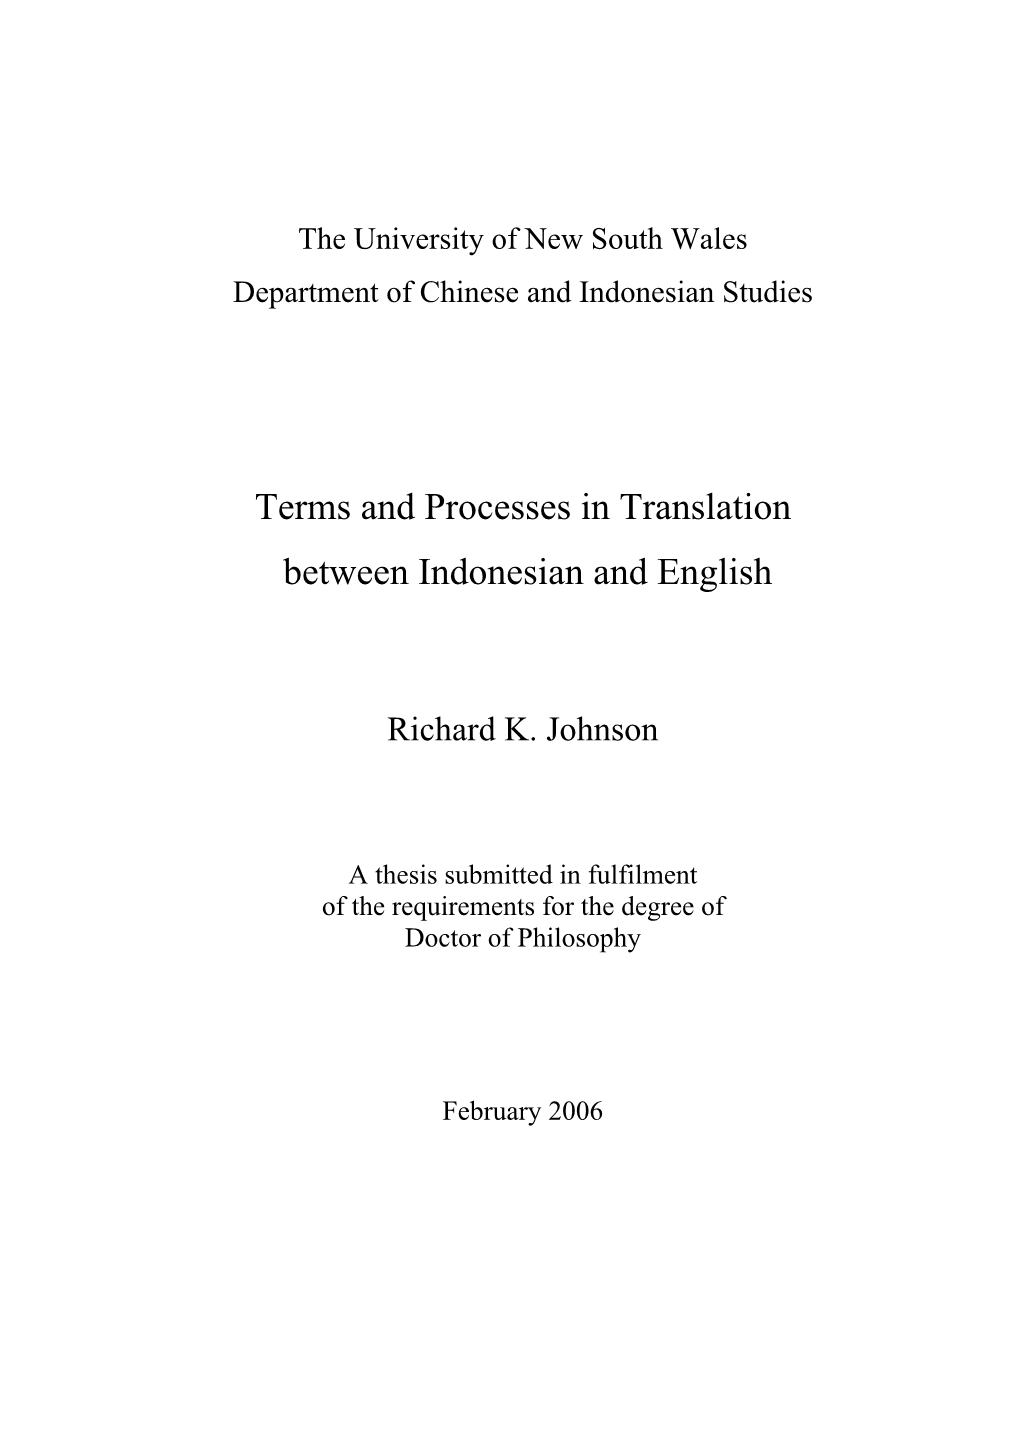 Terms and Processes in Translation Between Indonesian and English